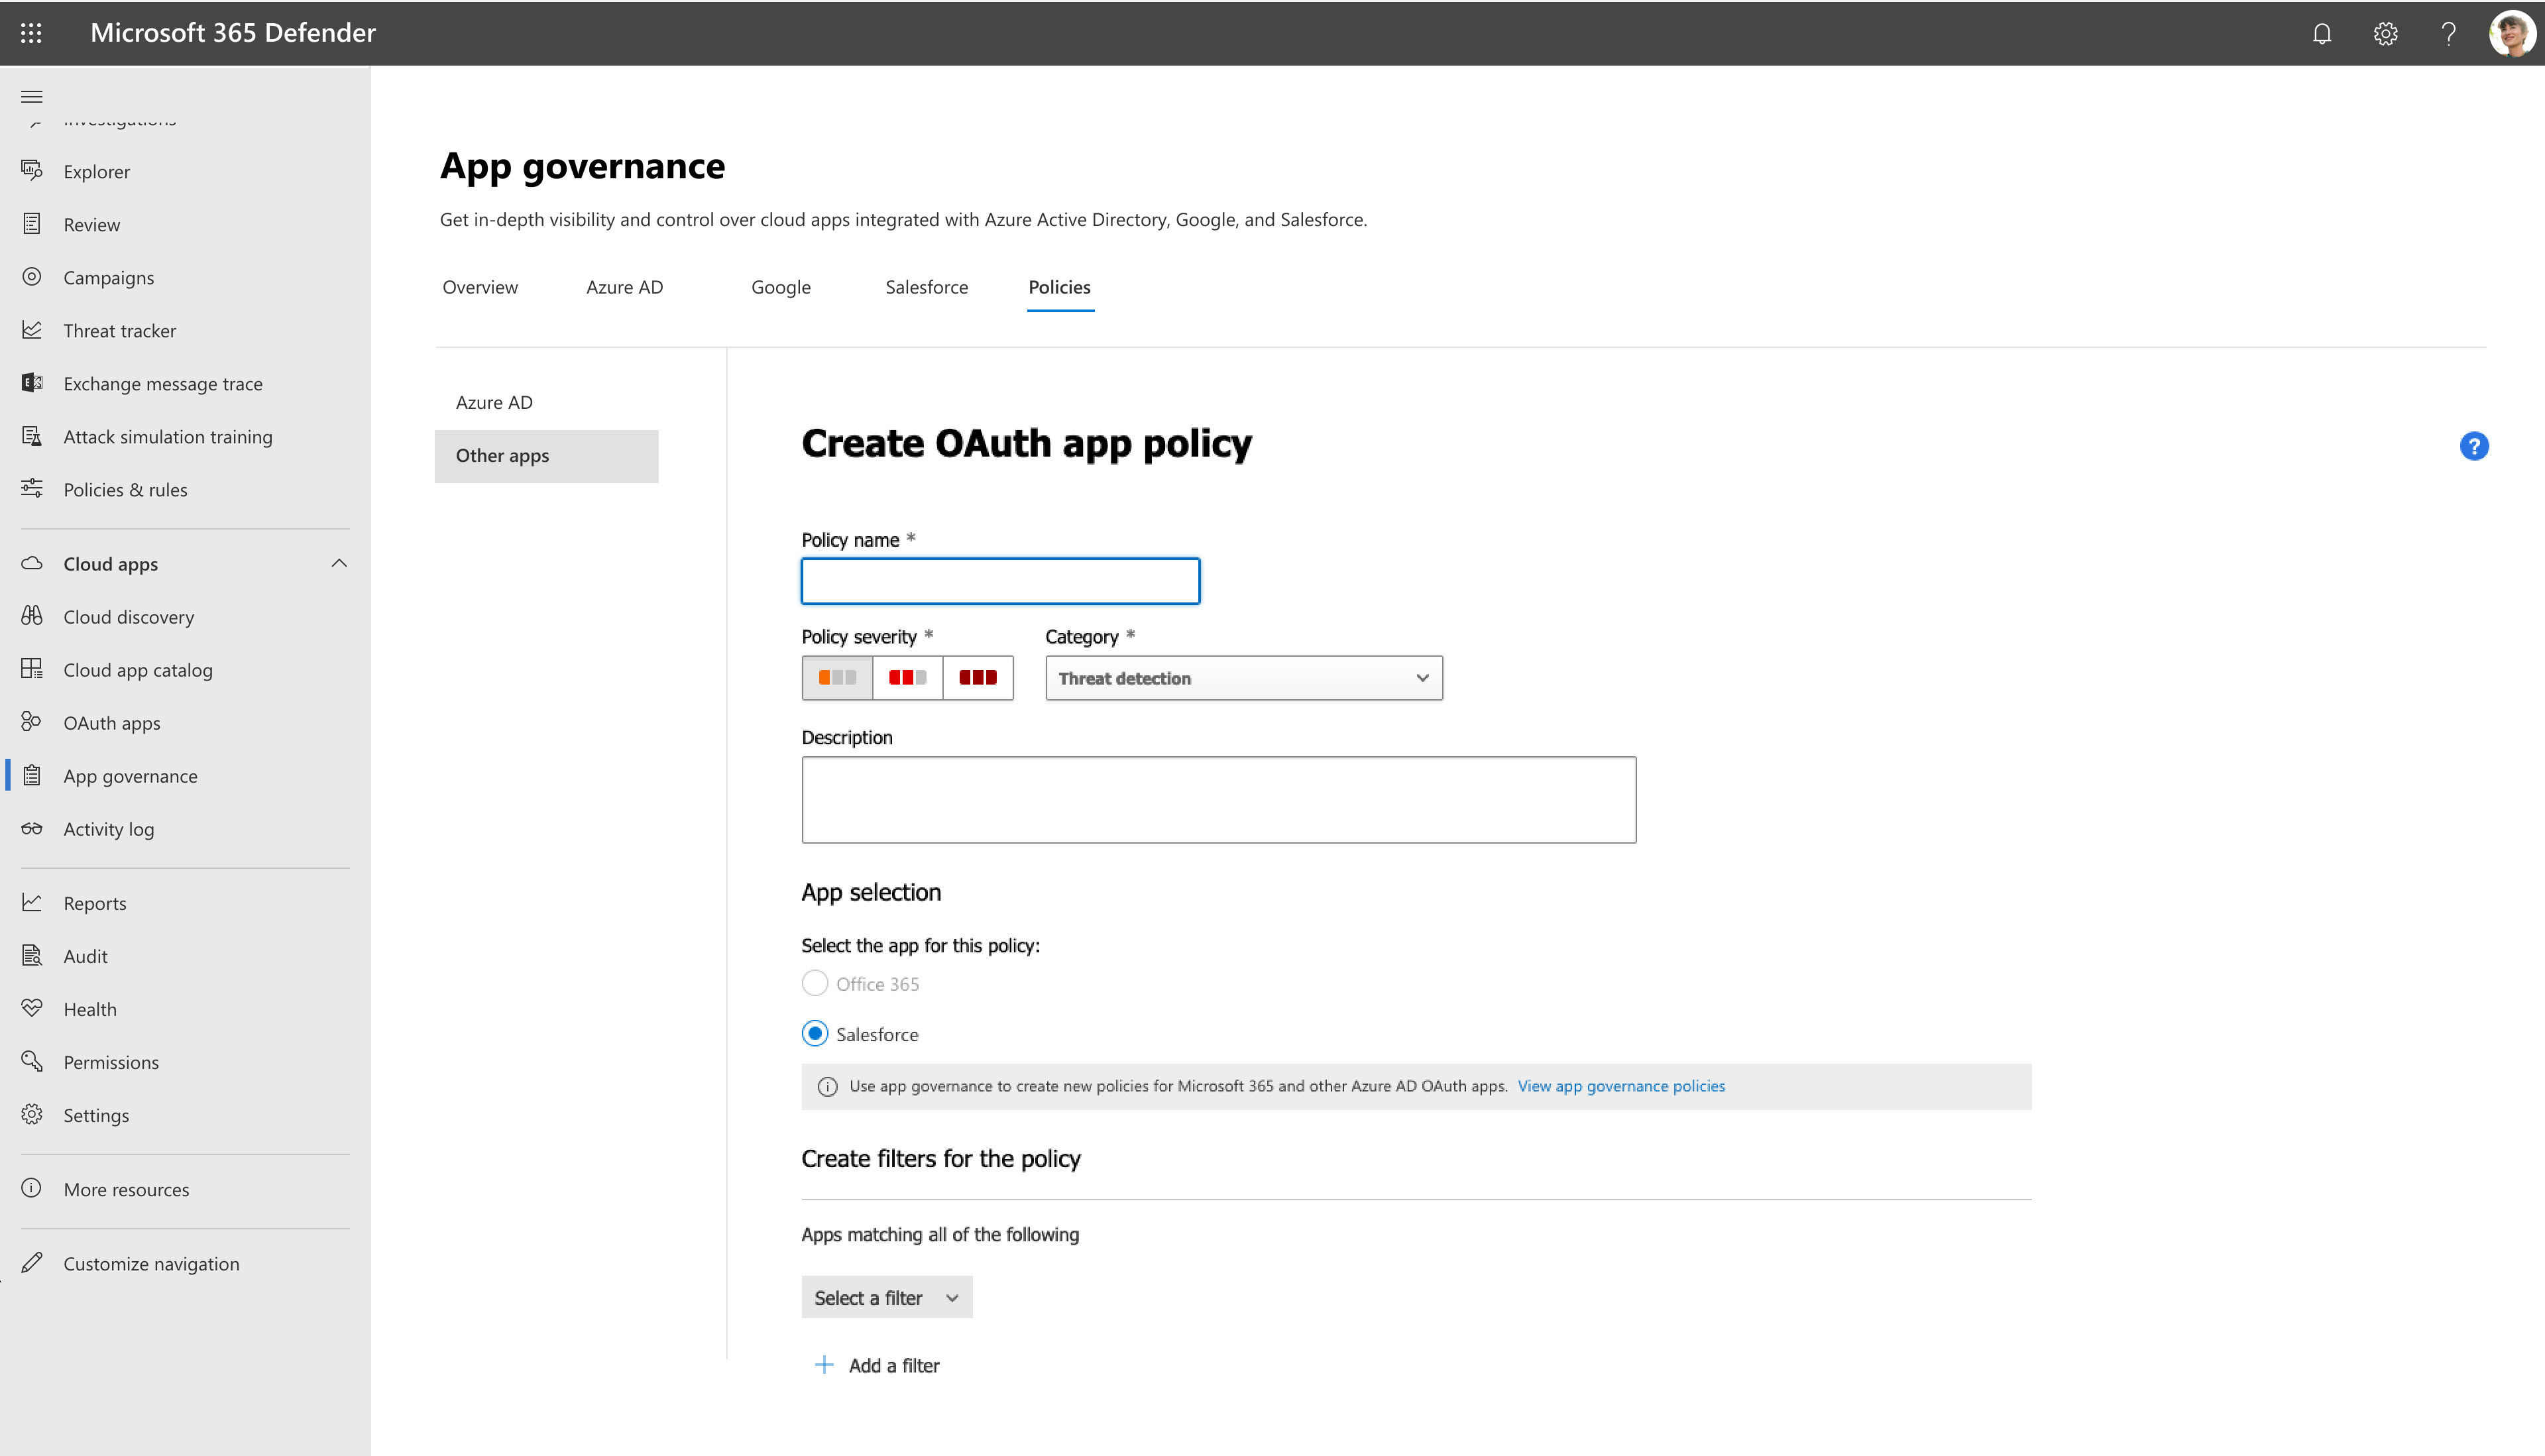 Other apps-policy creation